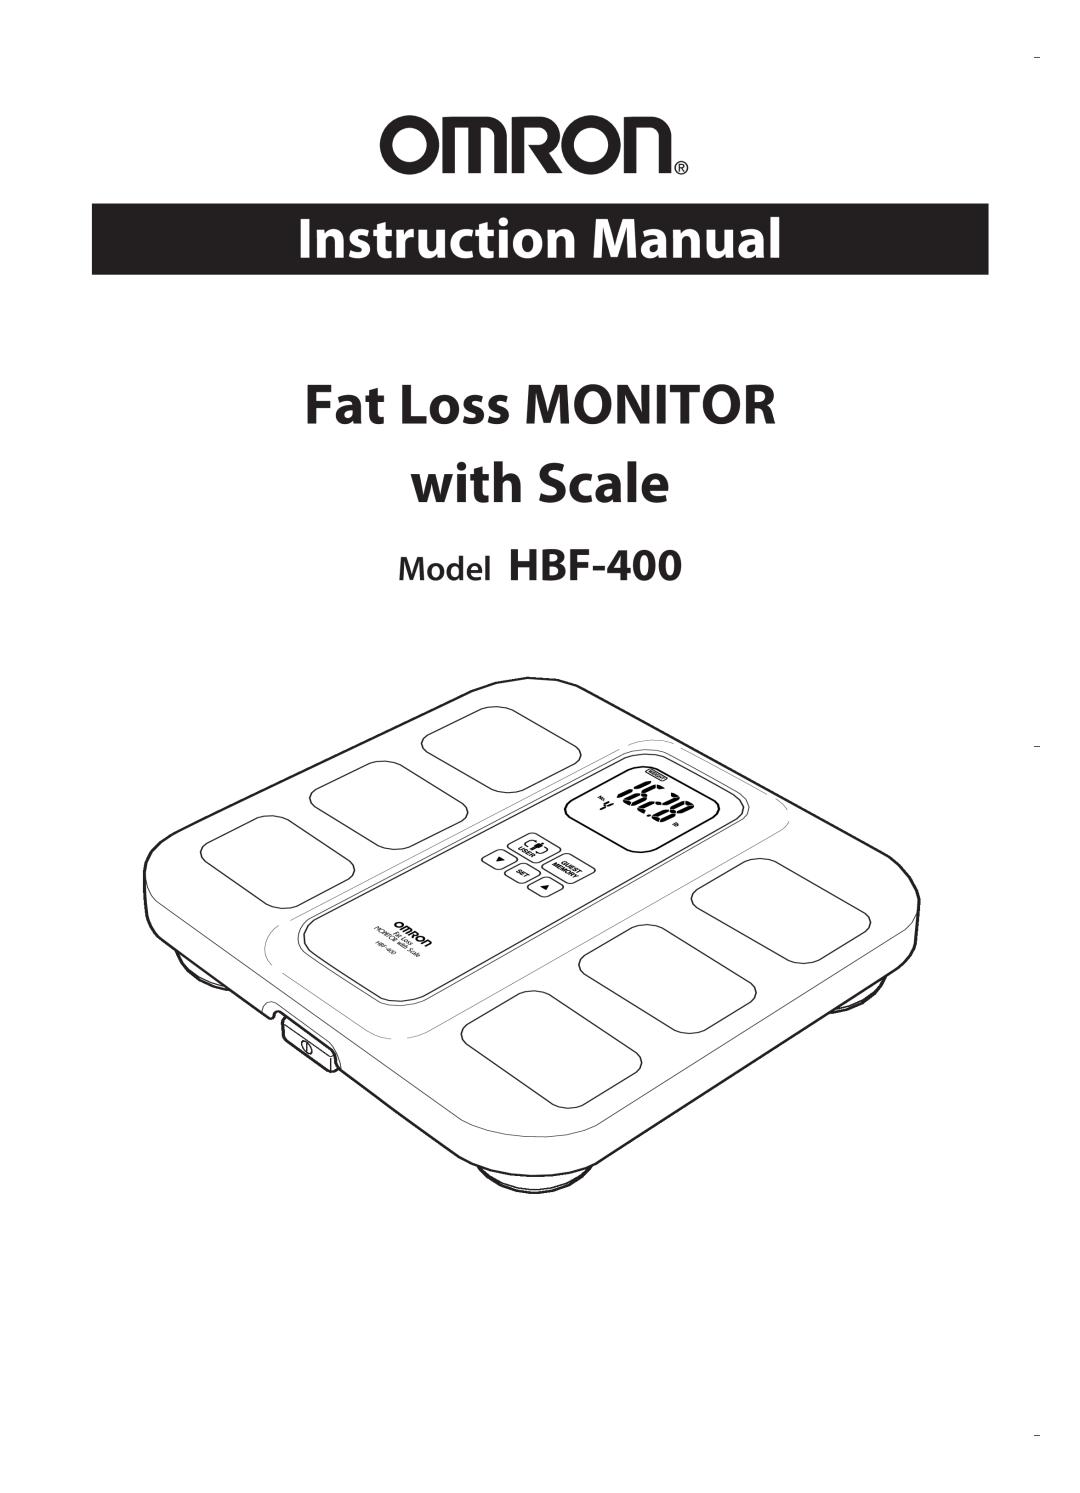 Omron instruction manual Instruction Manual, Fat Loss MONITOR with Scale, Model HBF-400 